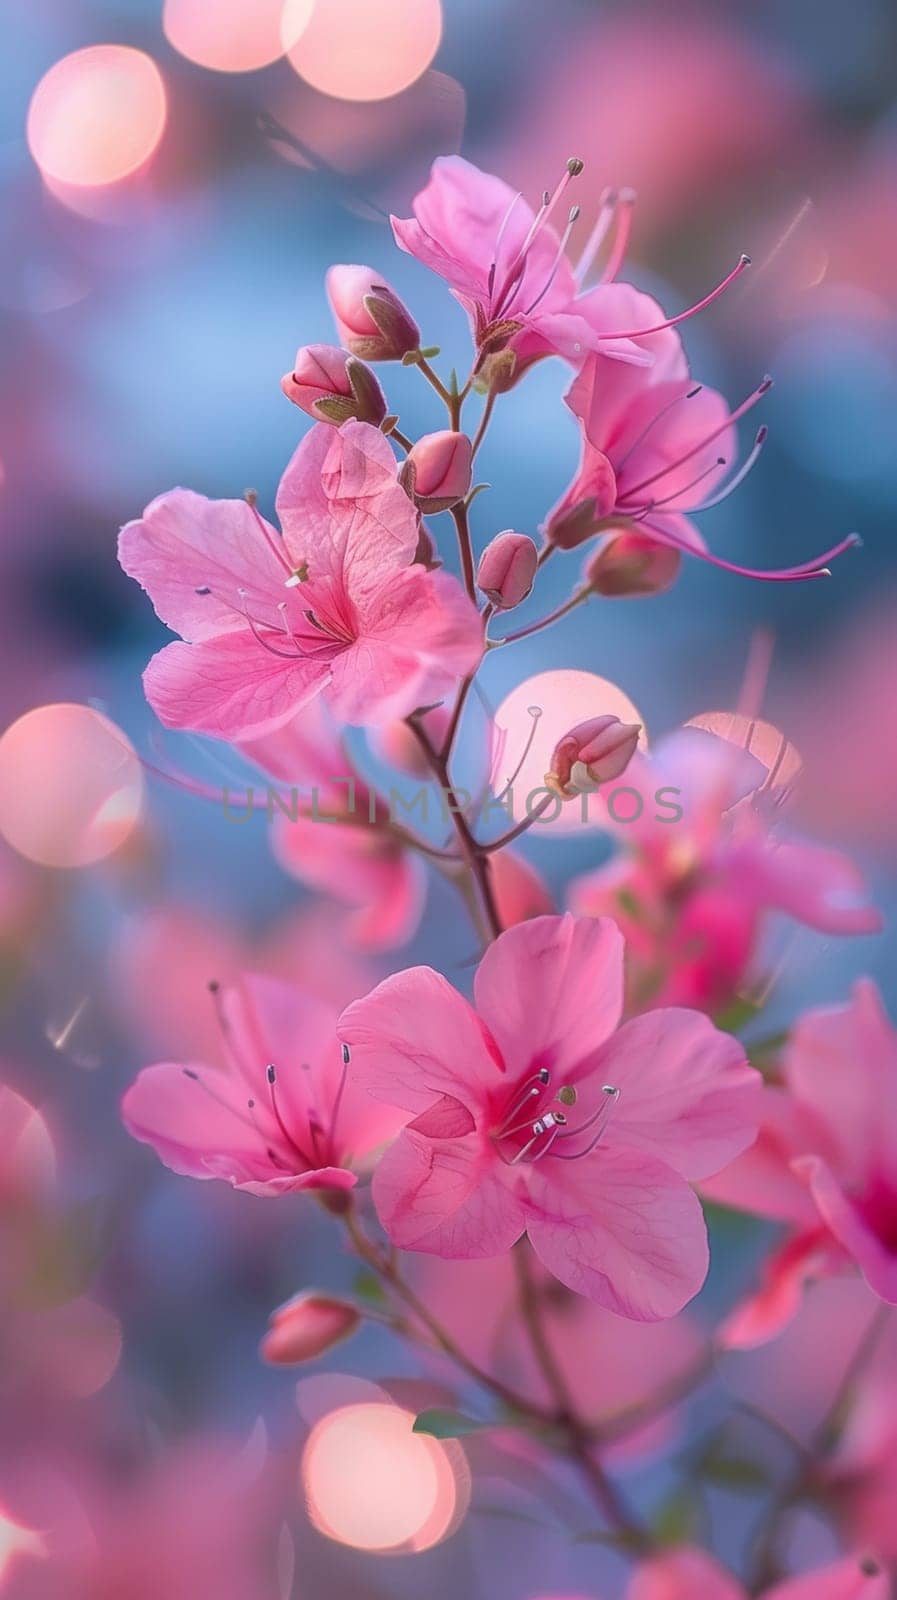 A close up of a pink flower with some blurry background